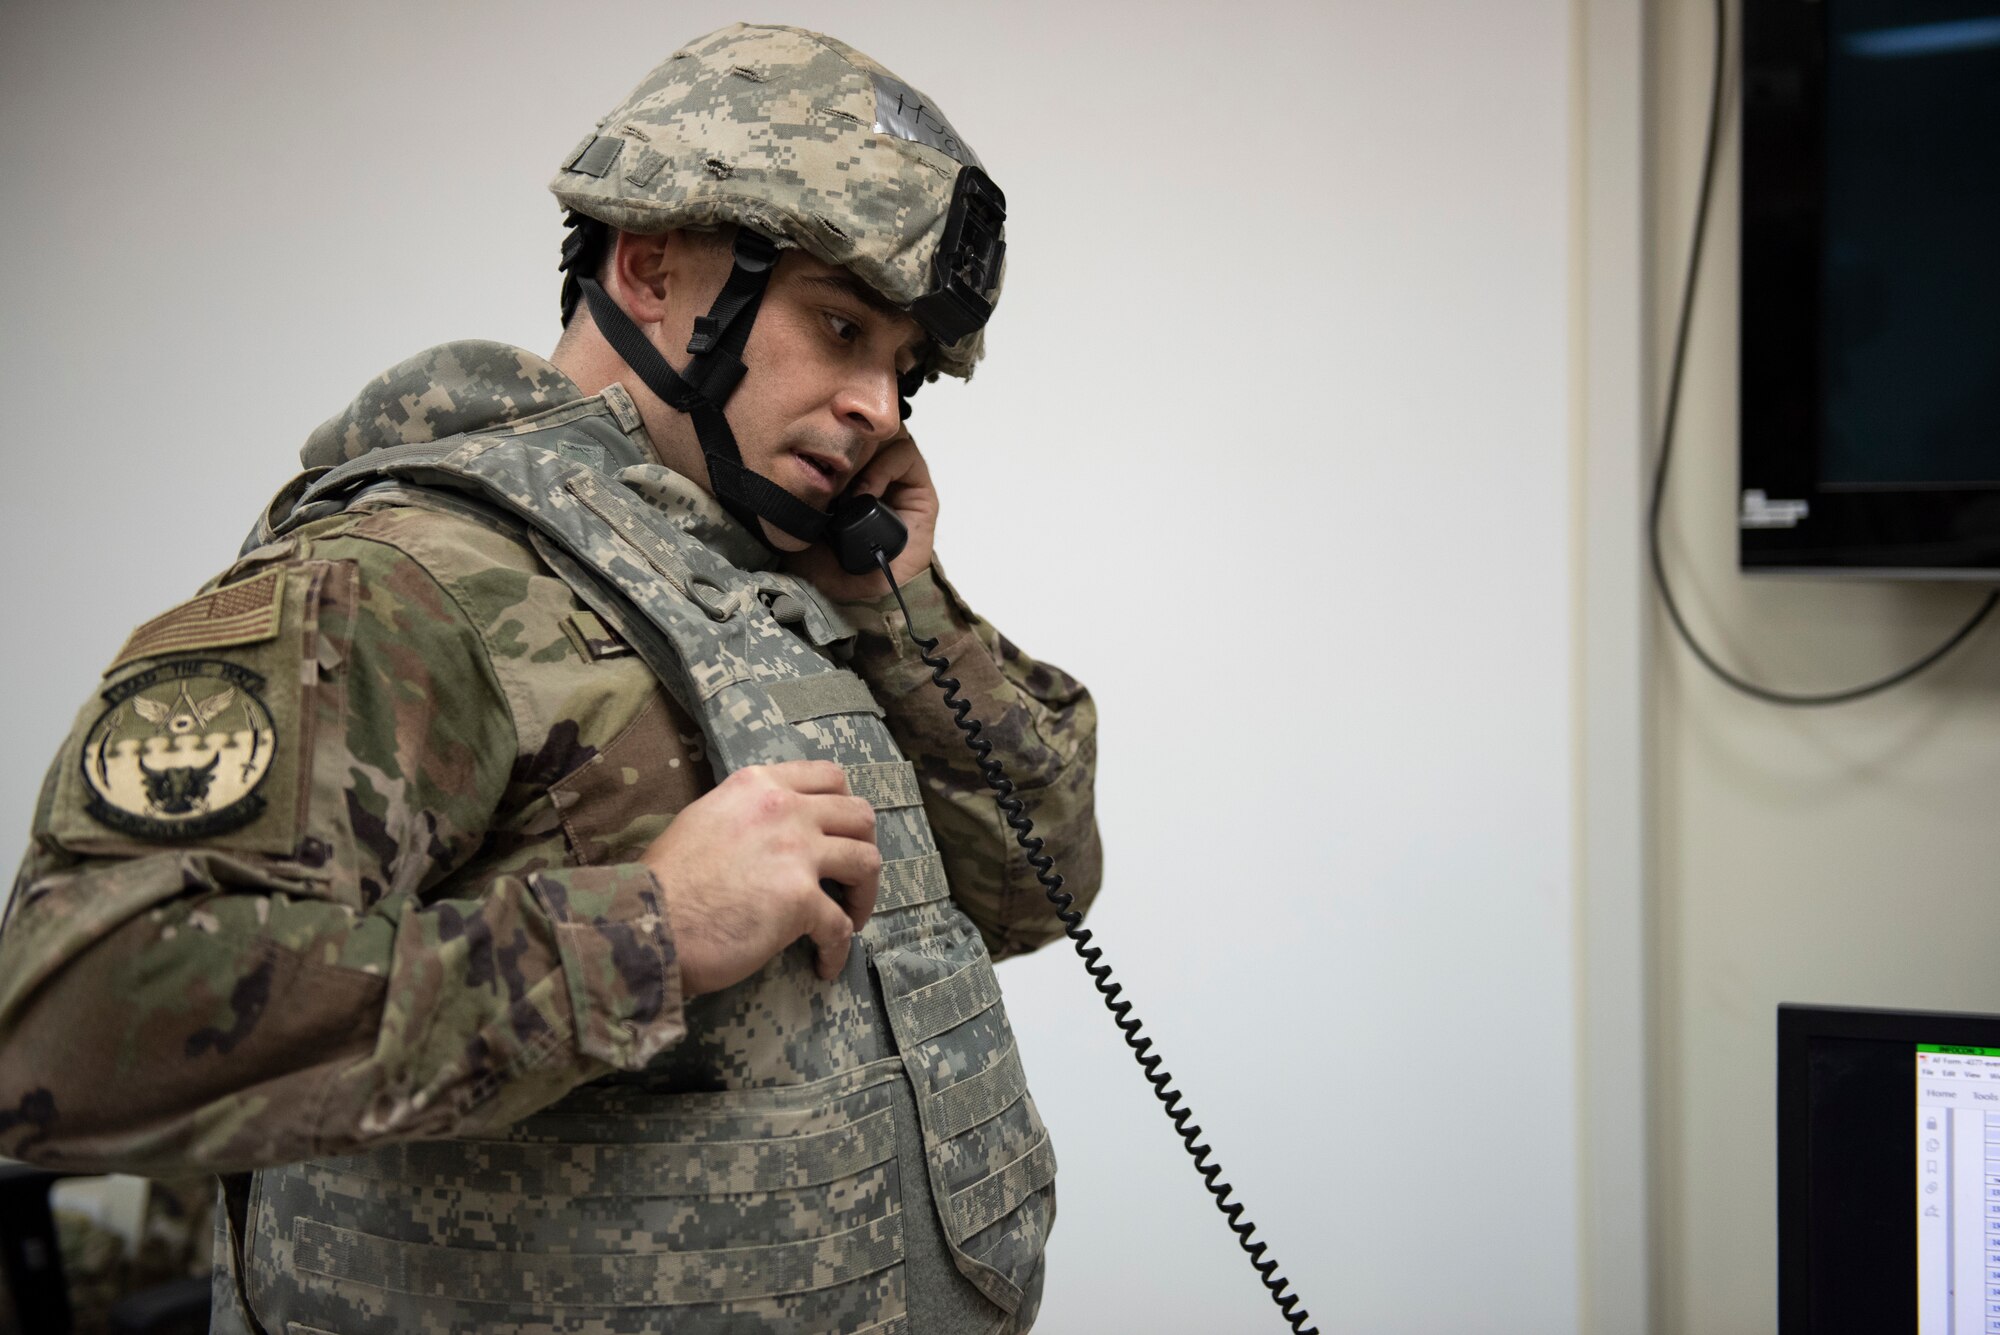 U.S. Air Force Master Sgt. Marshall Ritenour, 386th Expeditionary Civil Engineer Squadron requirements and optimization section chief, answers the phone during the Air and Missile Defense Exercise 21-1 at Ali Al Salem Air Base, Kuwait, Oct. 22, 2020.